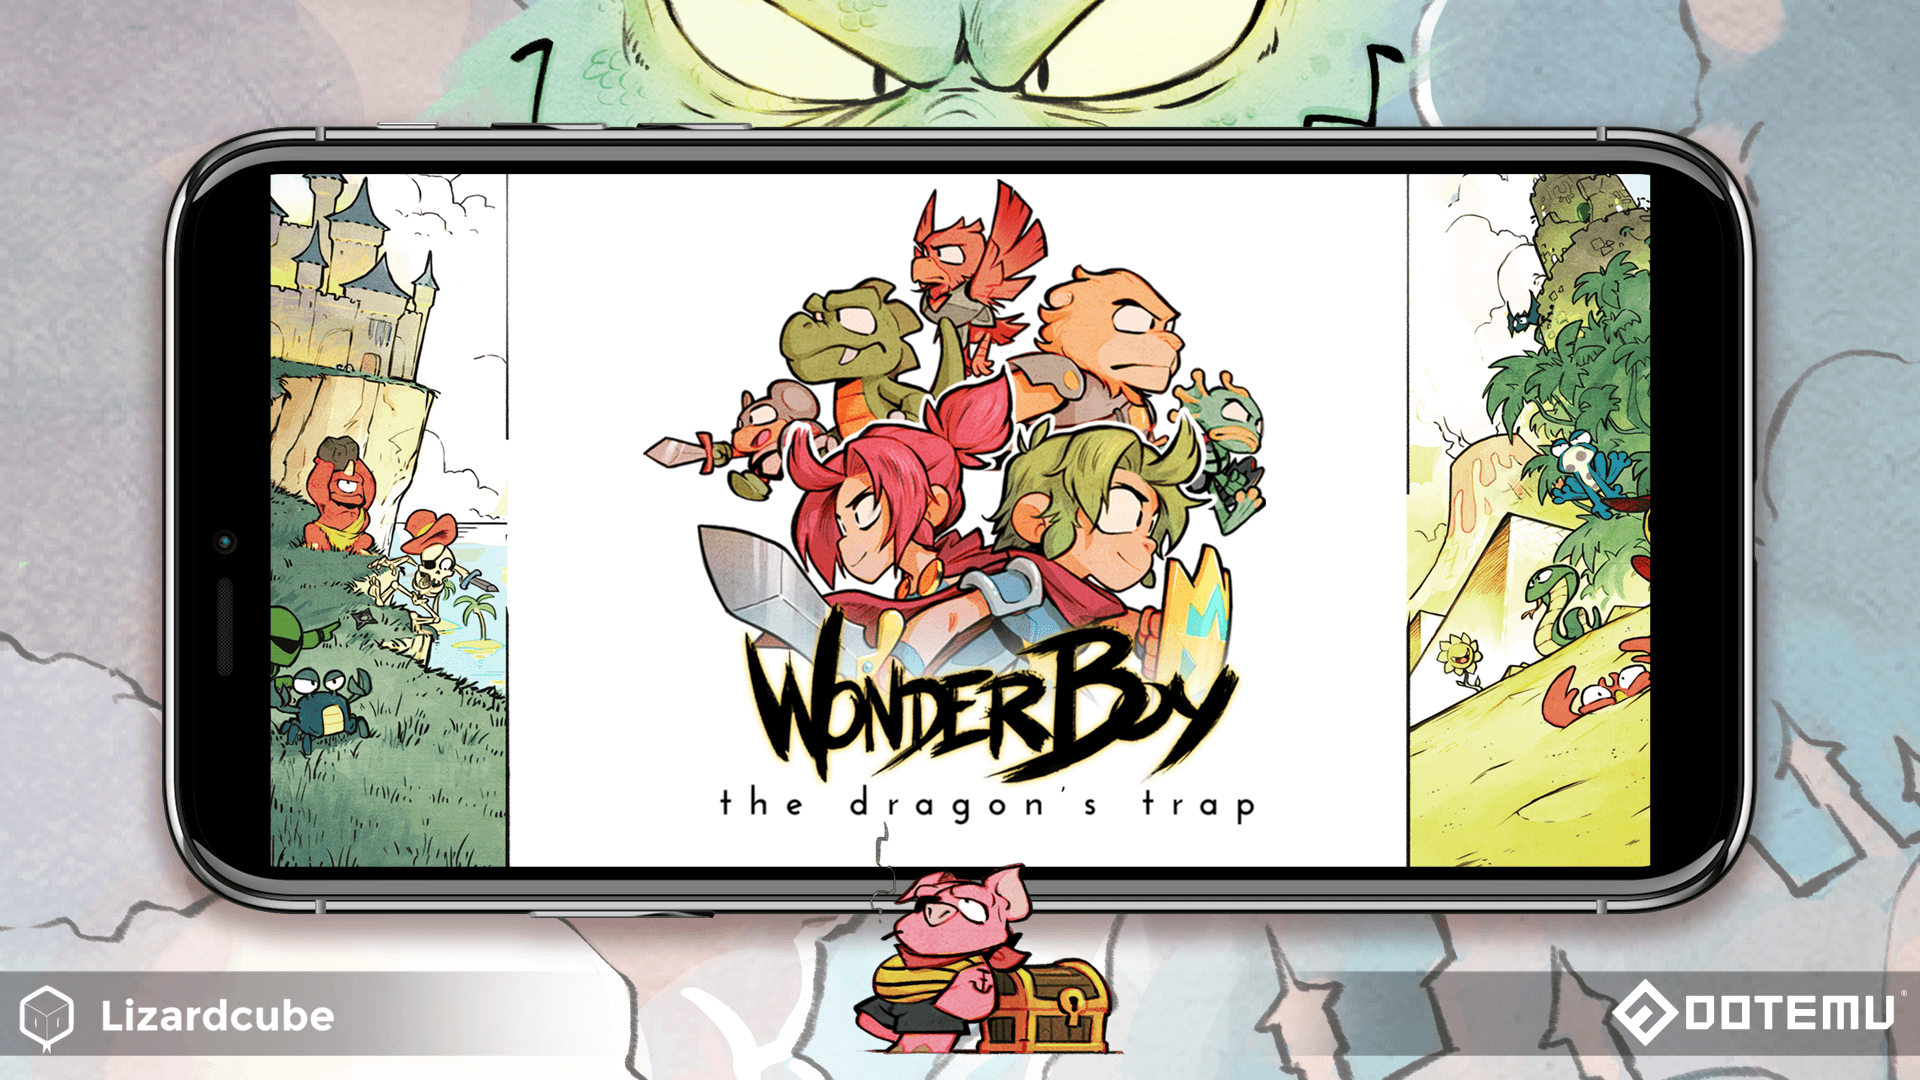 Wonder Boy The Dragon’s Trap is coming on iOS and Android!